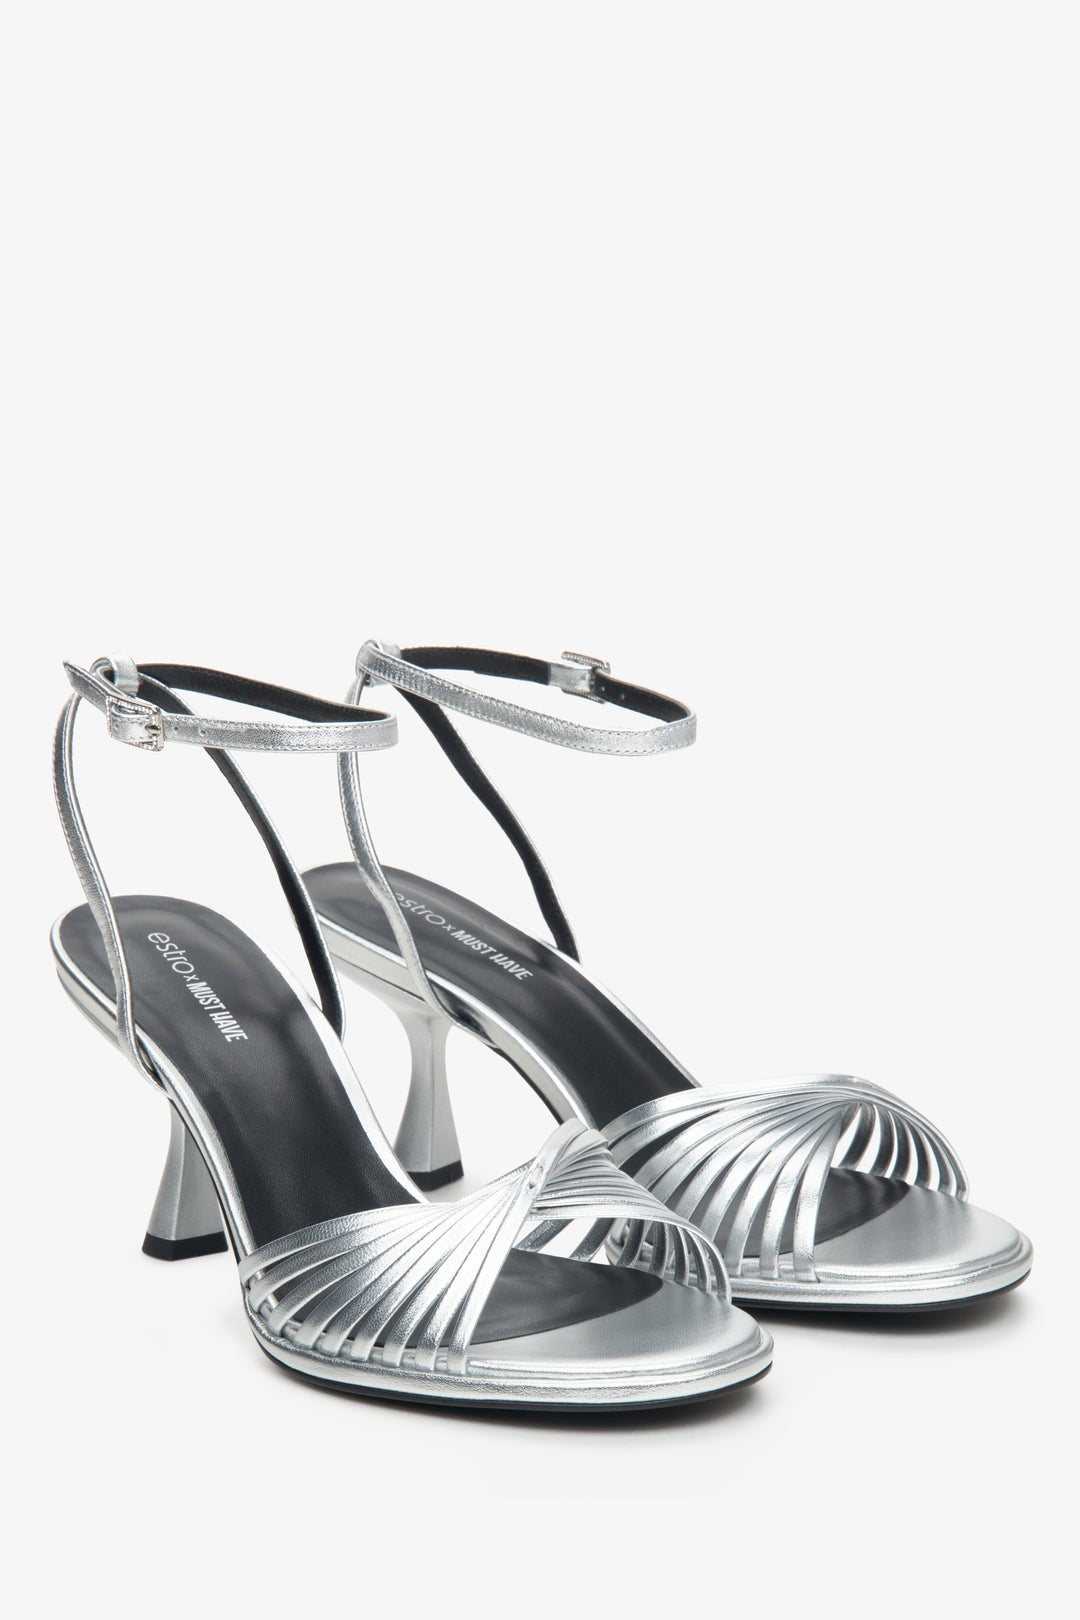 Estro x MustHave silver women's sandals with stiletto heels.